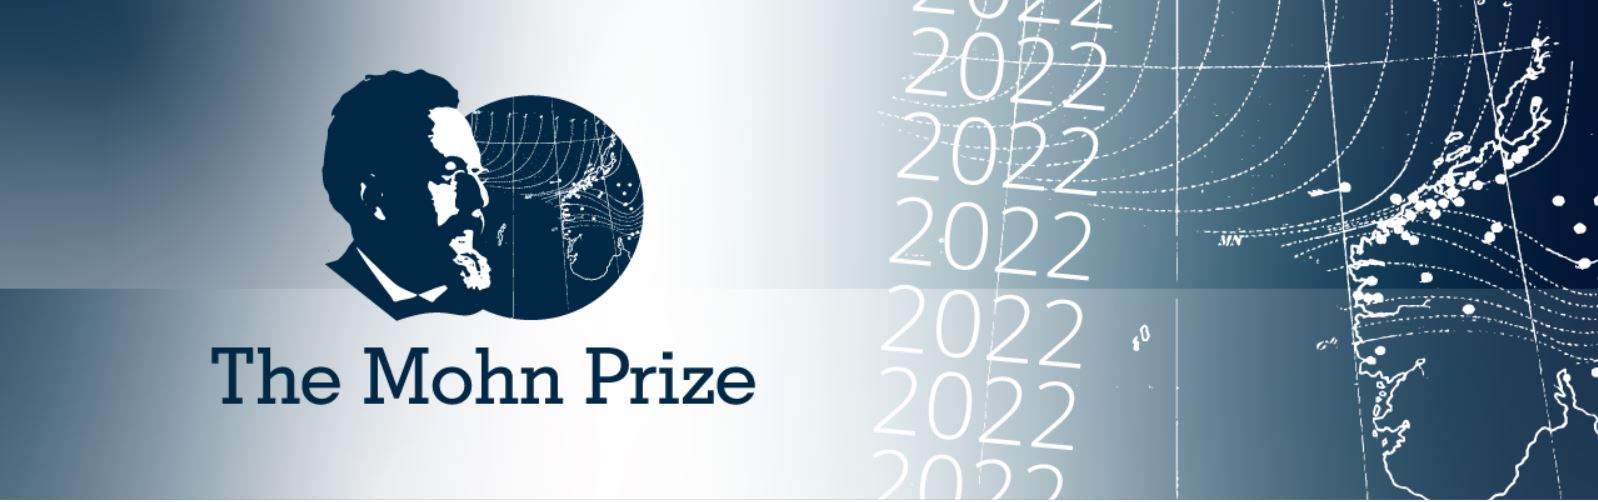 319 The Mohn Prize 2022 Call for nominations